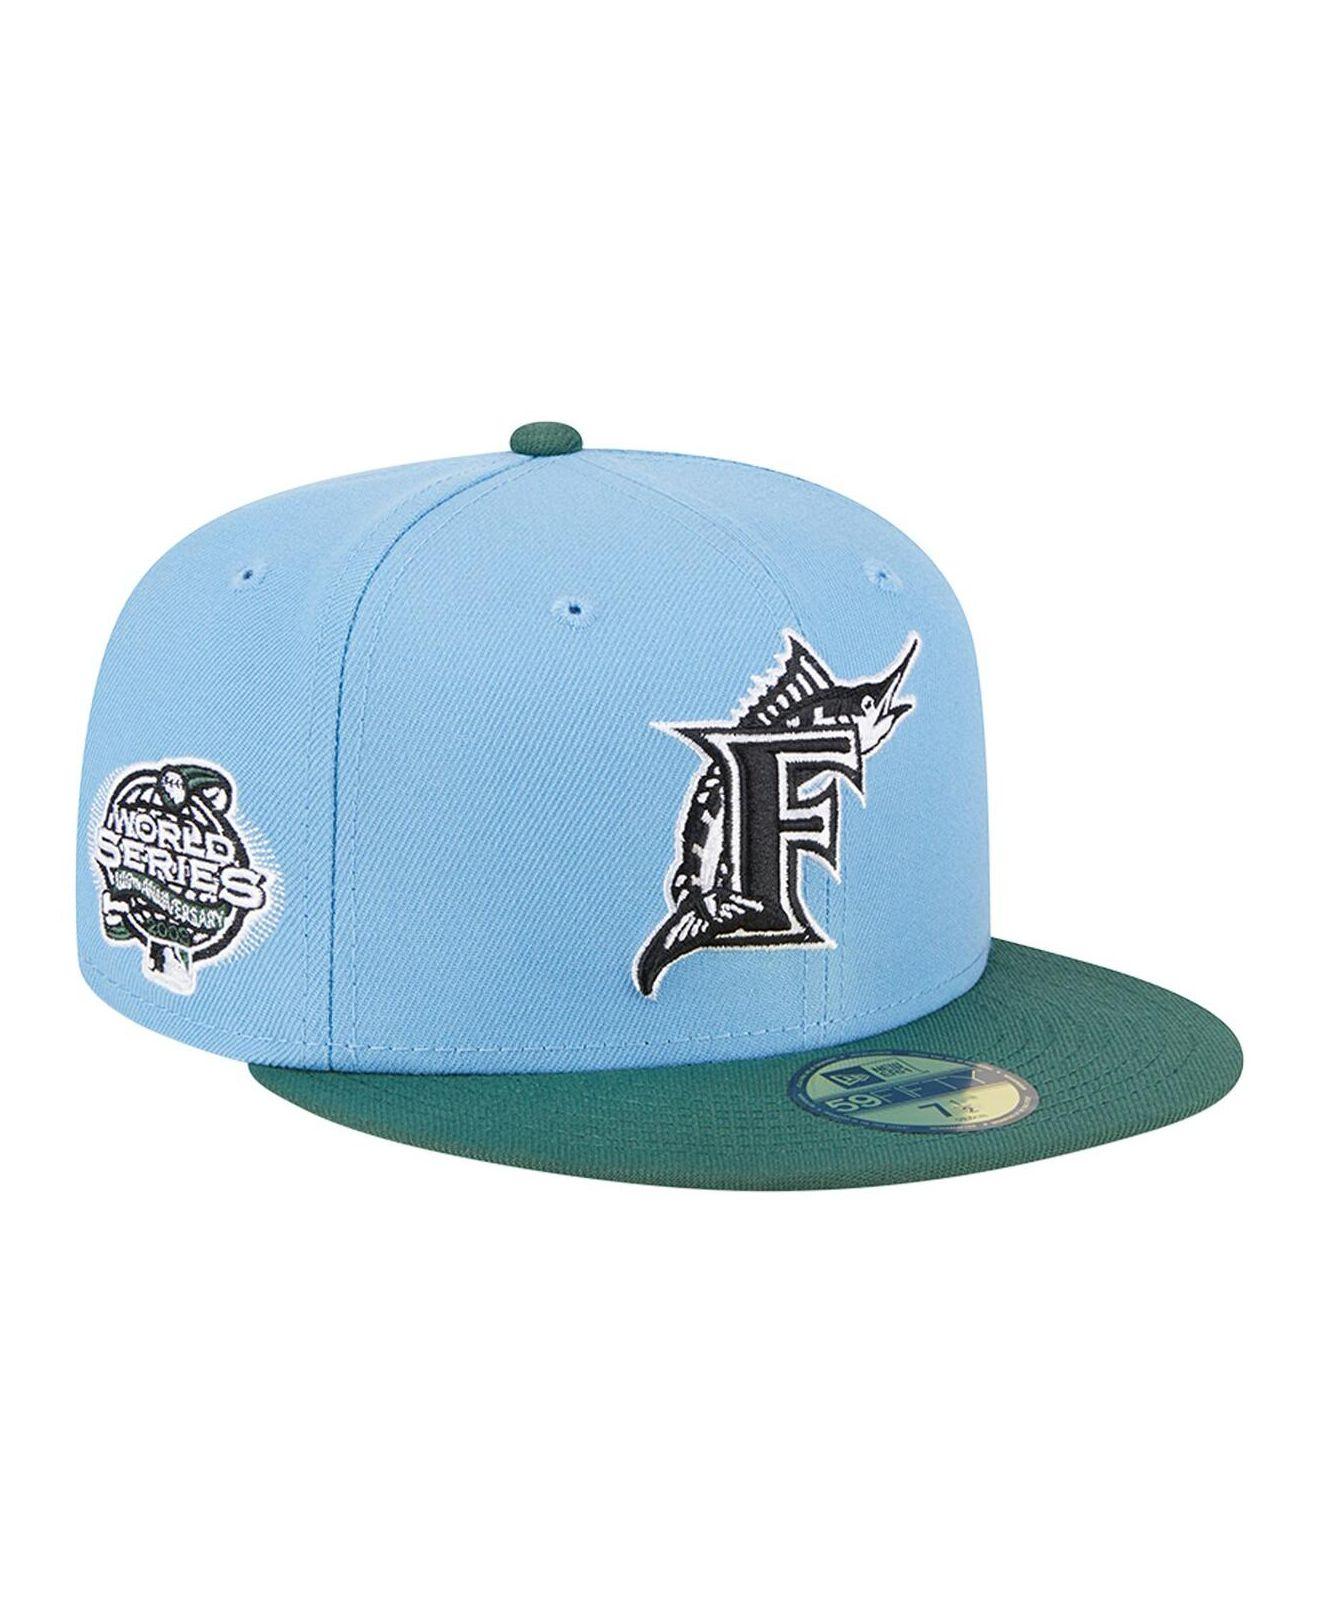 St. Louis Cardinals New Era Dolphin 59FIFTY Fitted Hat - Gray/Blue